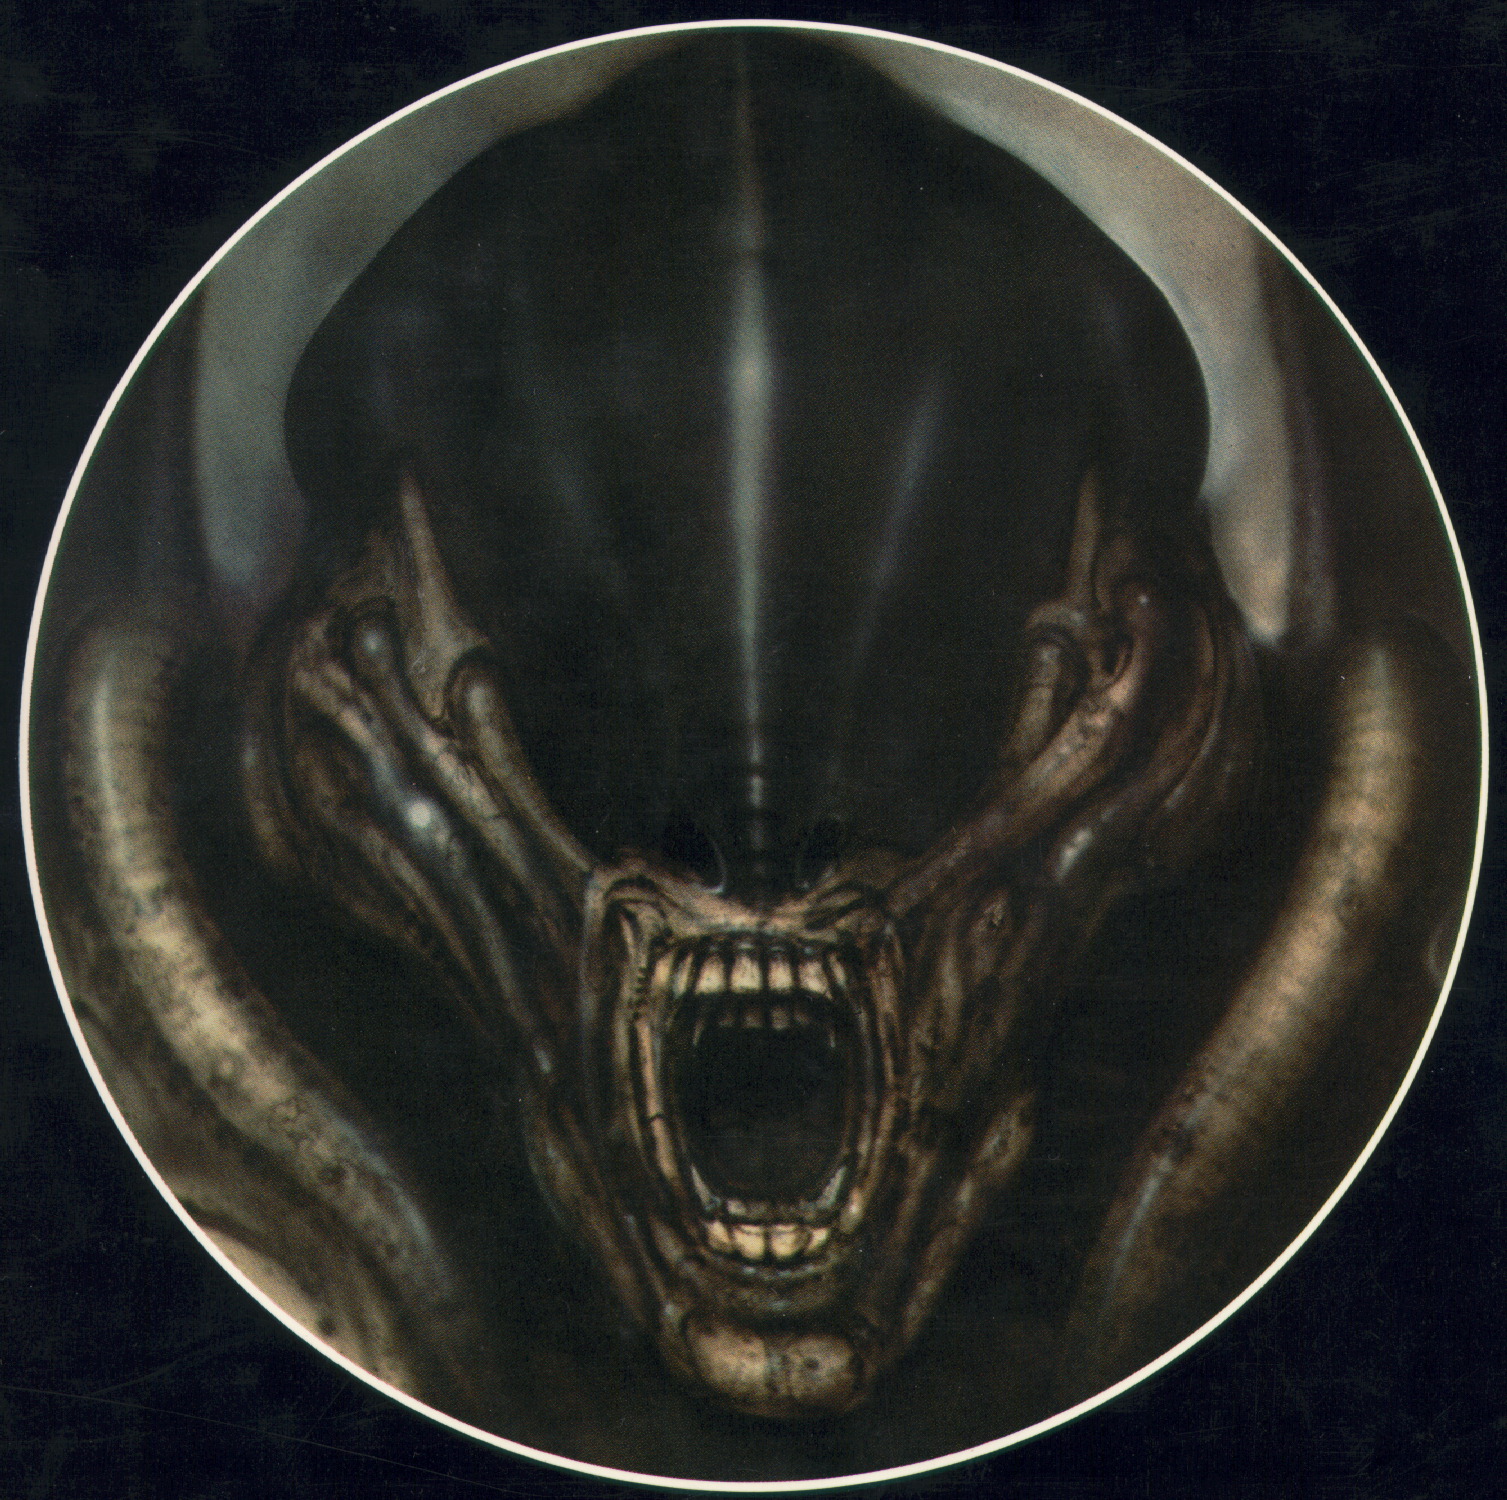 Alien by Giger